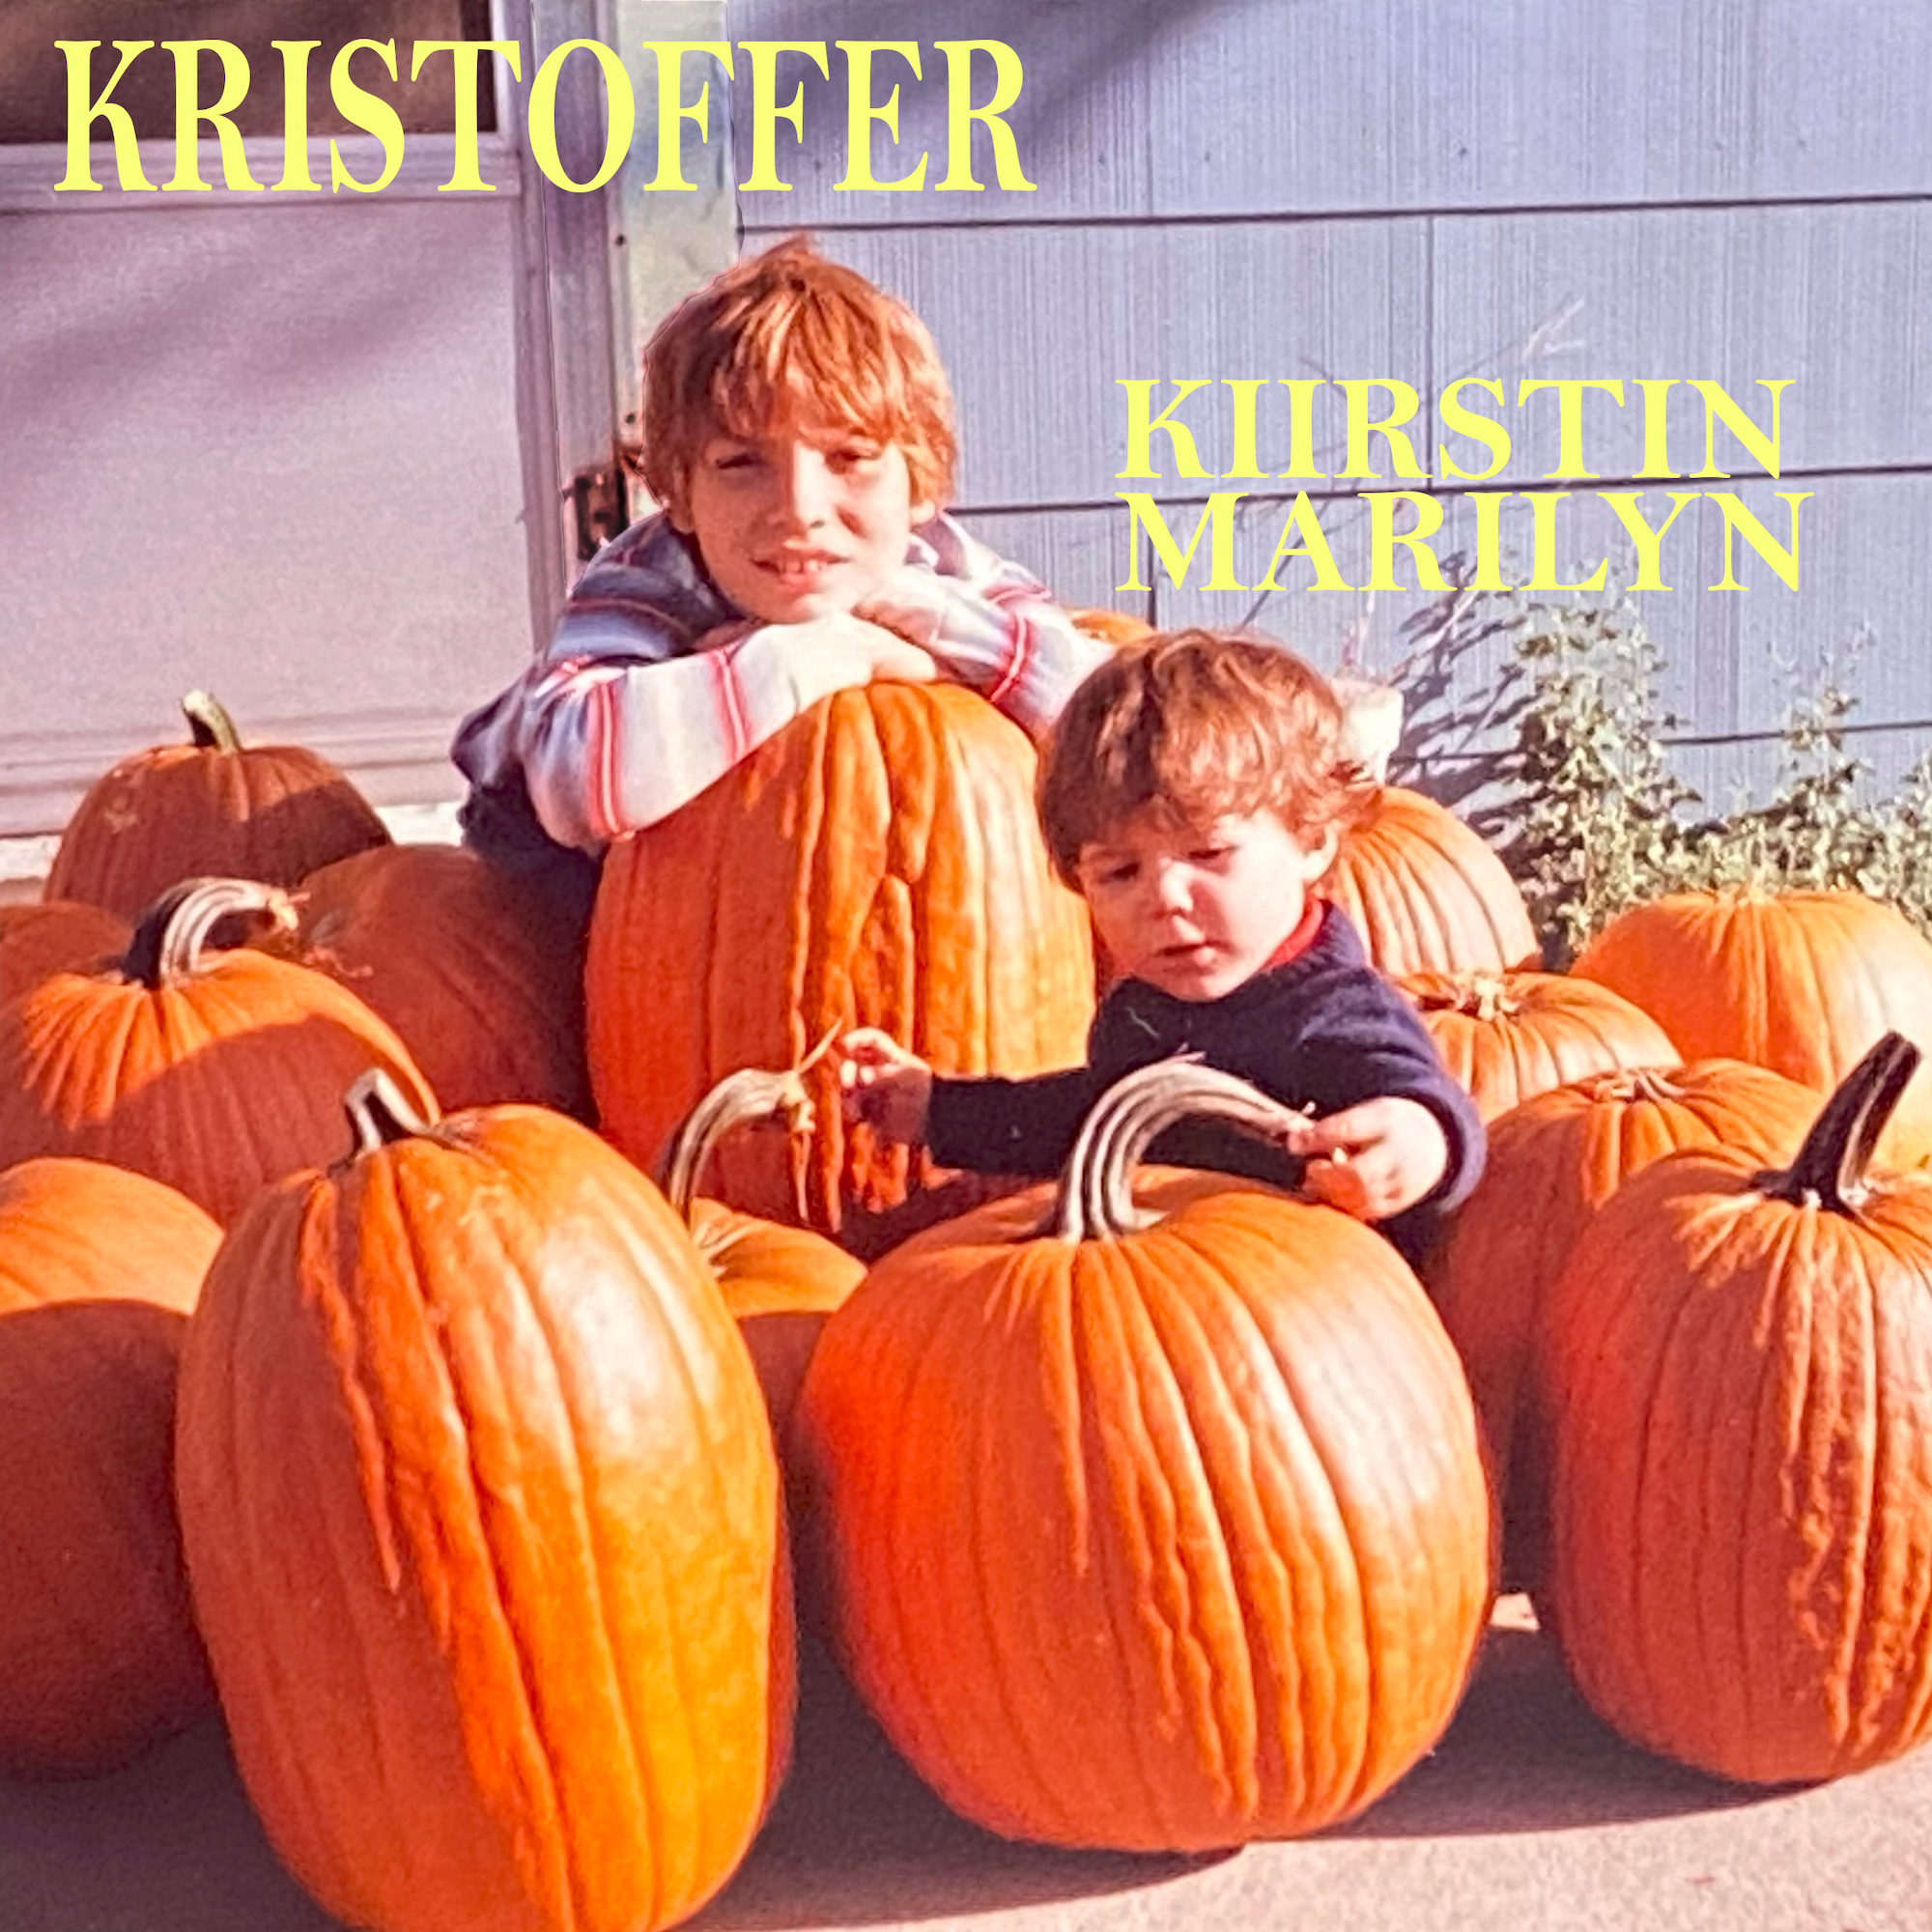 Kiirstin Marilyn releases “Kristoffer”, a heartfelt eulogy to her beloved late brother